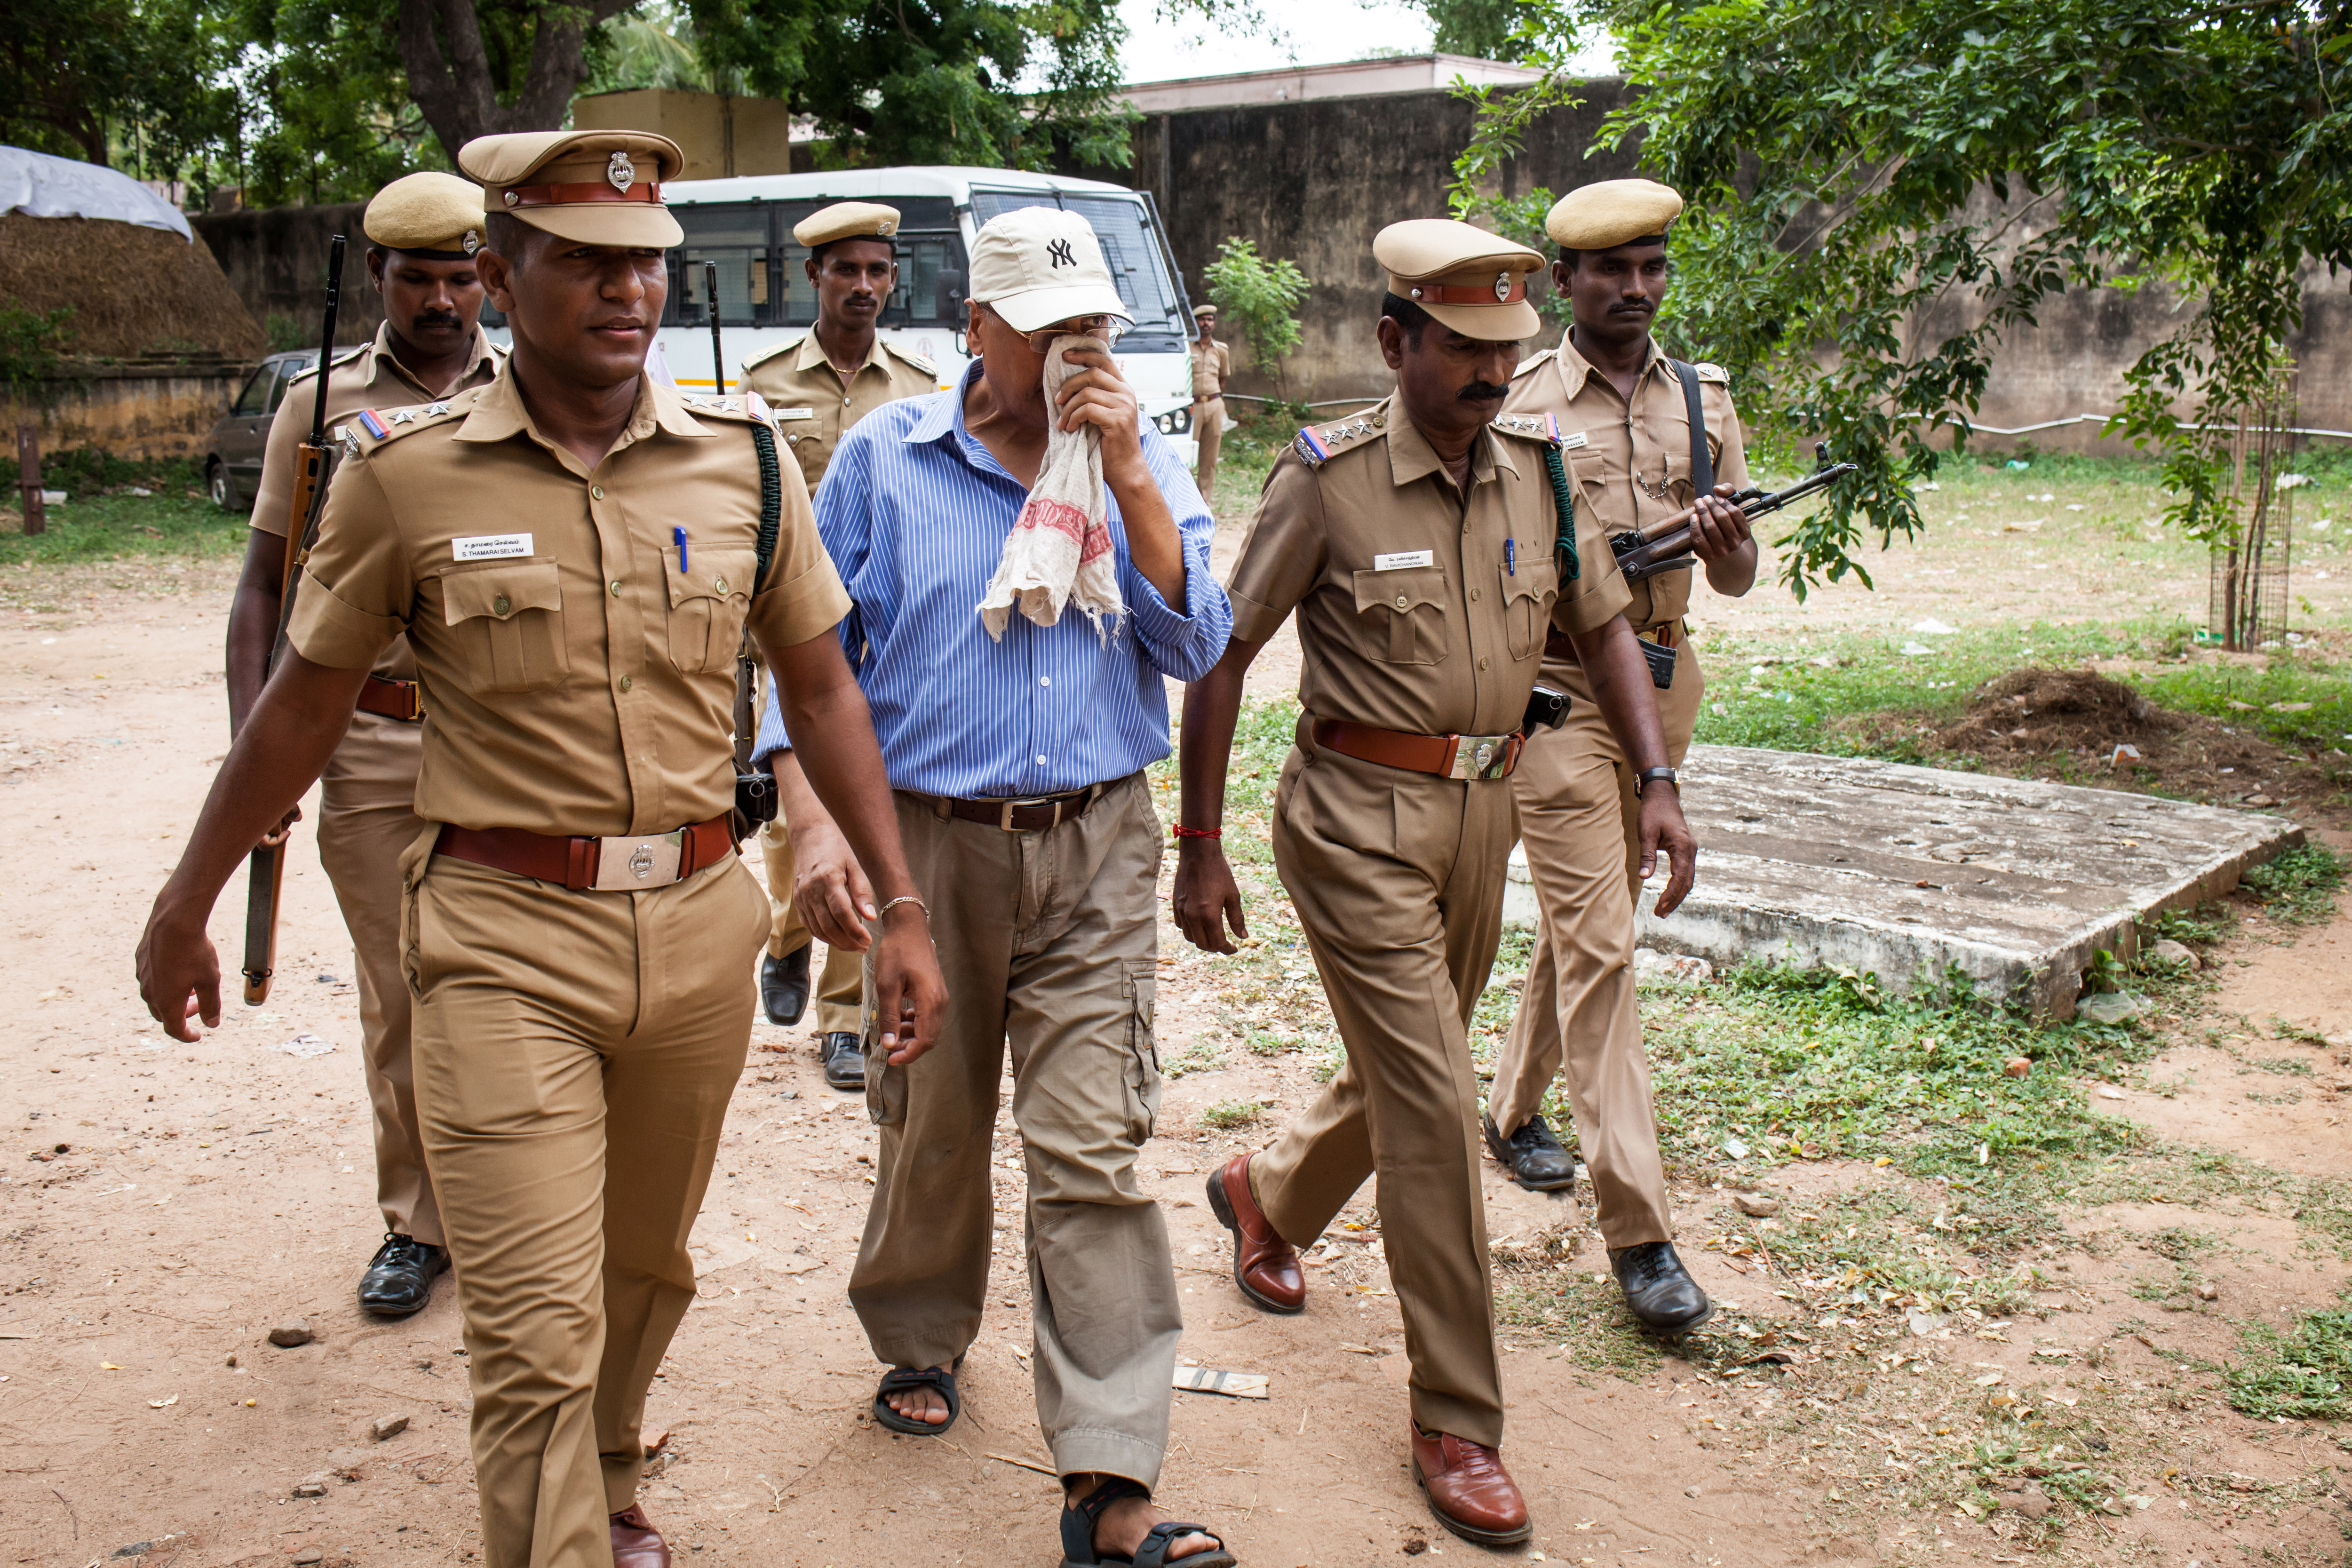 Subhash Kapoor is escorted to court by police in Jeyamkondam, India, on July 8, 2015. Kapoor, a former Madison Avenue art dealer whom investigators had identified as a major antiquities smuggler, has been convicted and sentenced to prison in India on burglary and illegal export charges in Nov. 2022. (Amirtharaj Stephen/The New York Times)